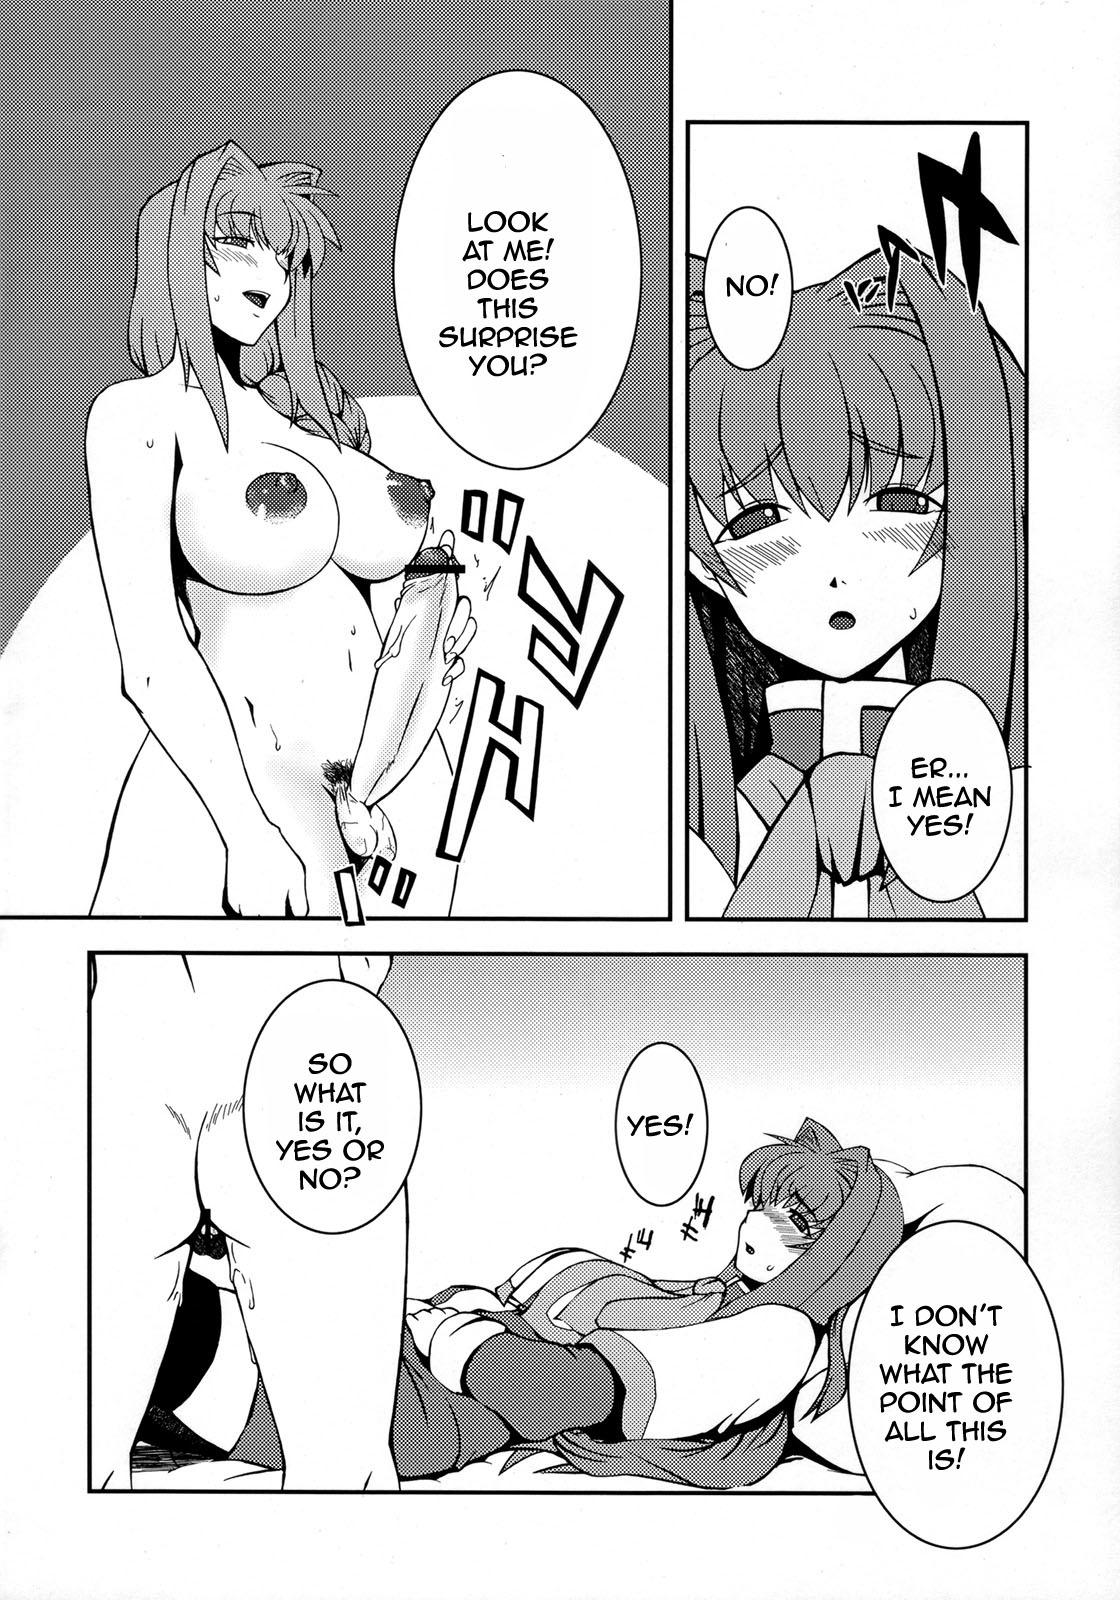 Longhair Kyouki Vol.1&2 Remake Ver. - Kanon Massages - Page 12